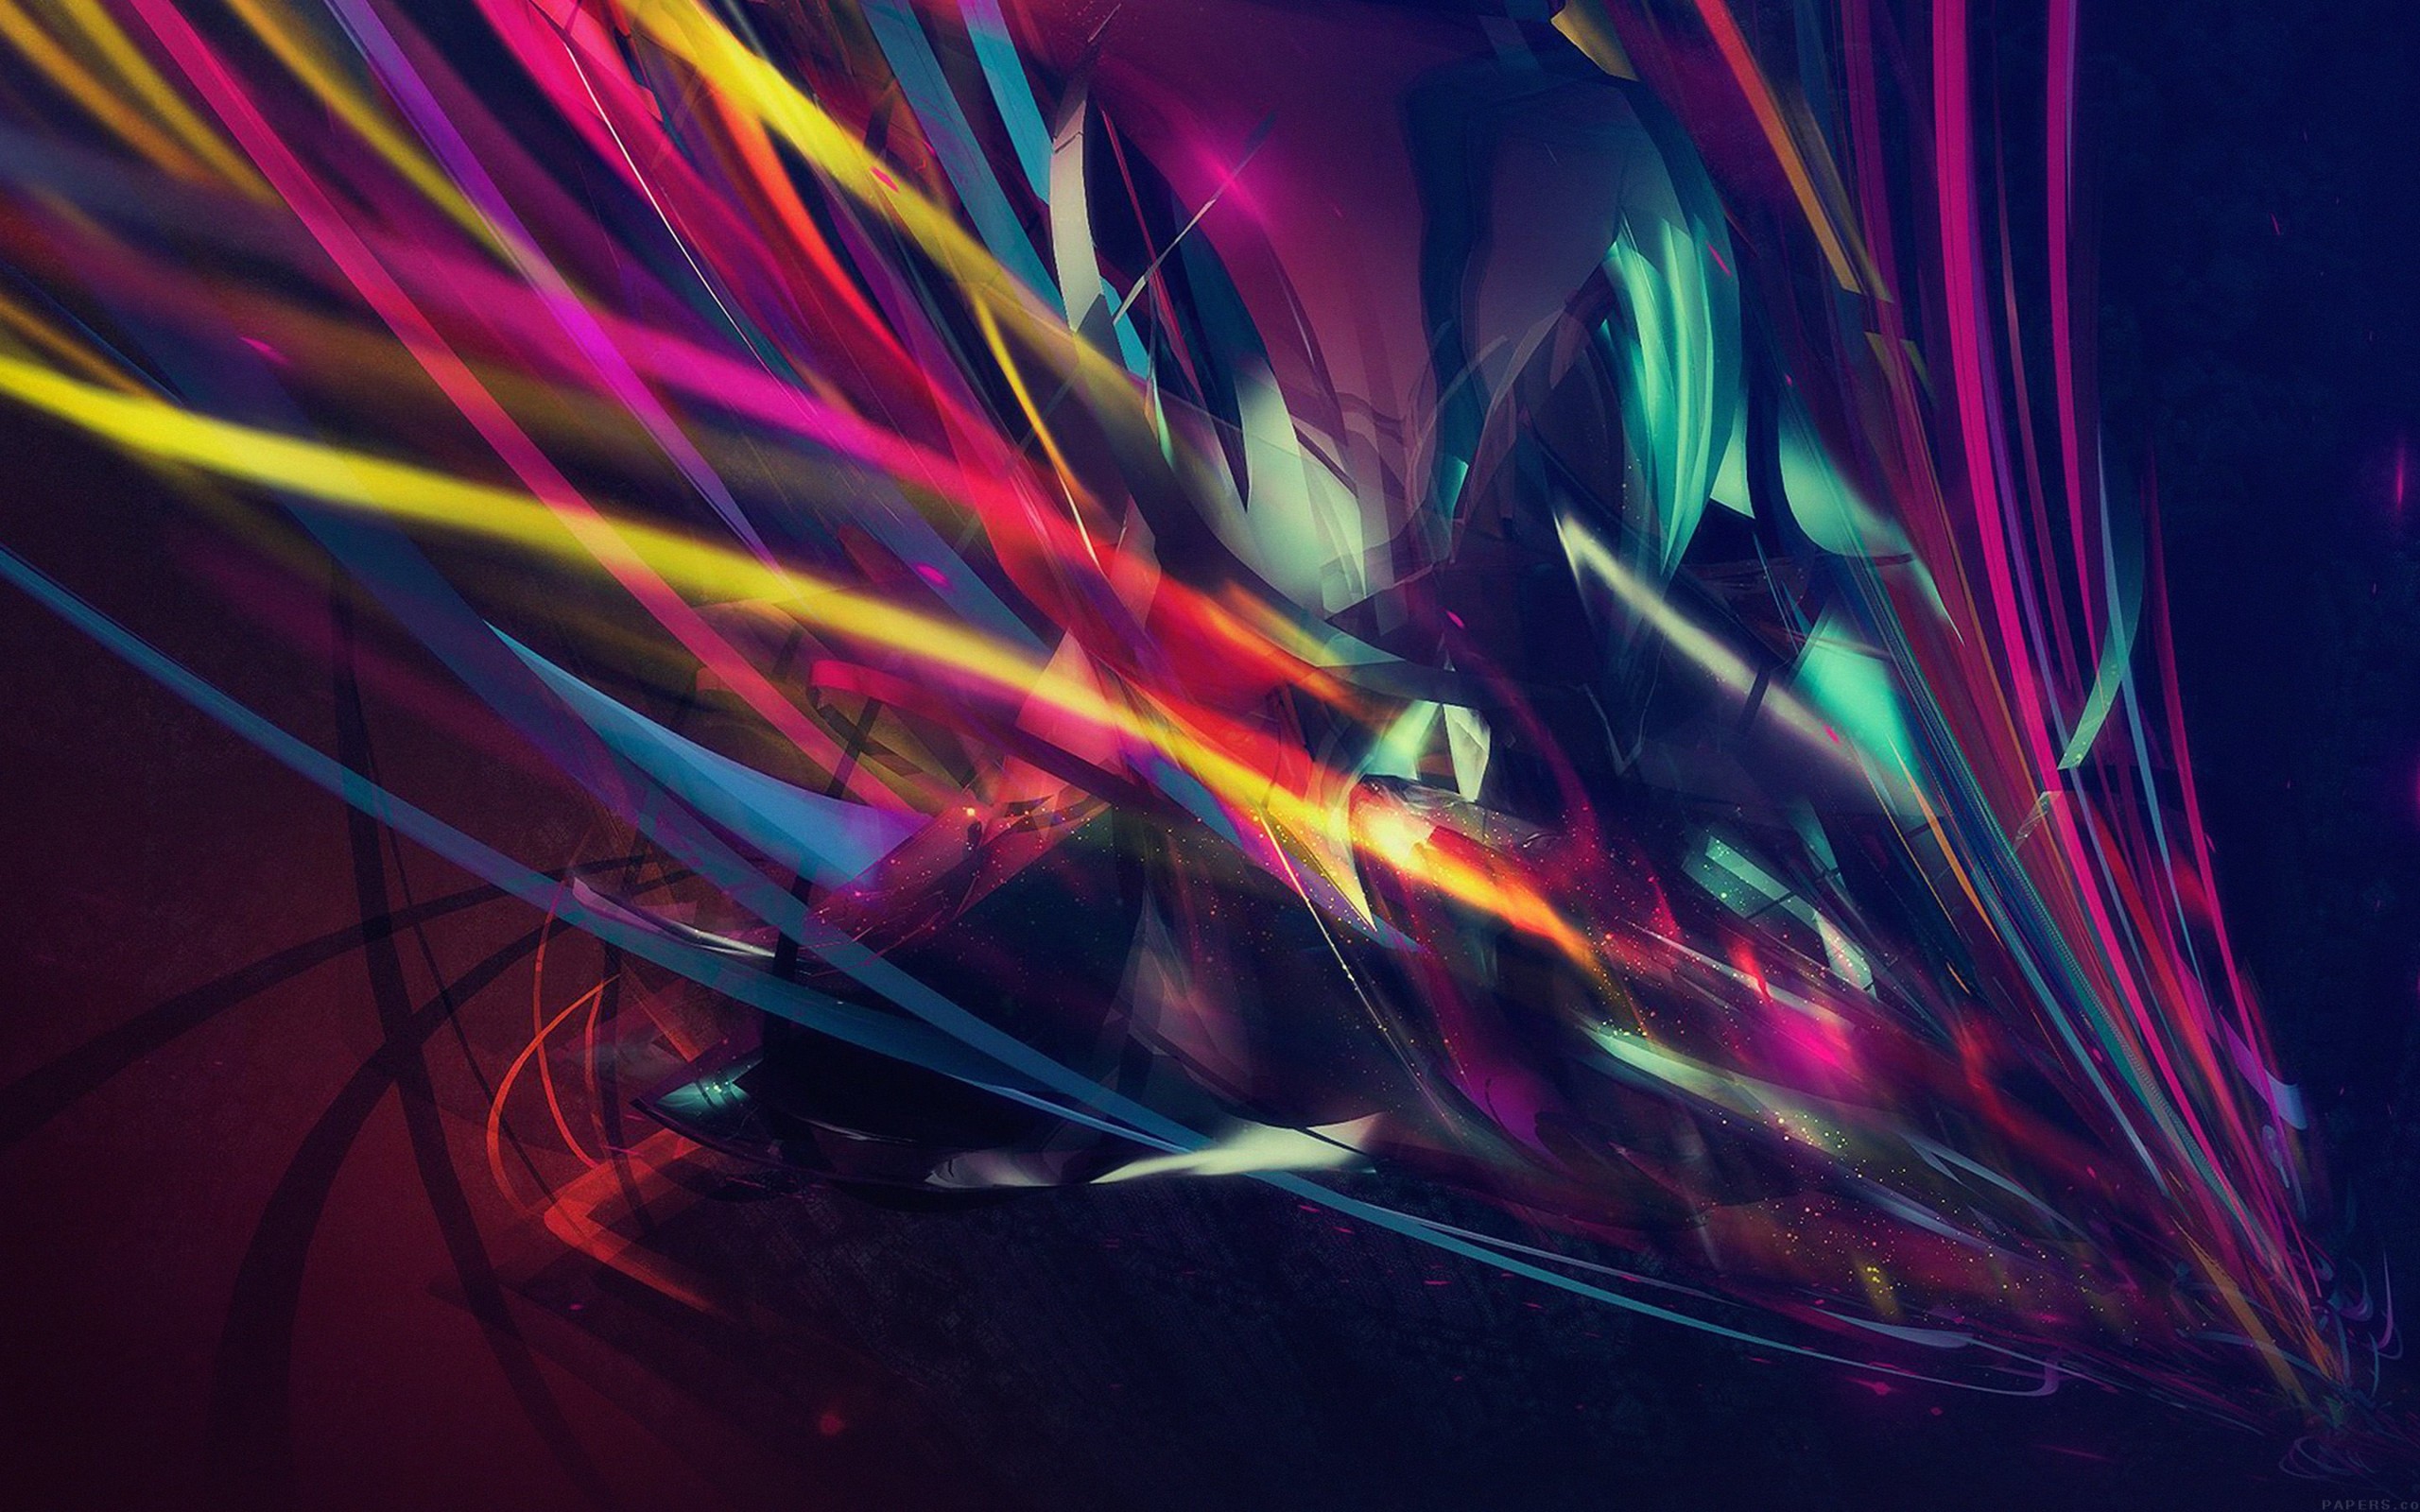 Abstract Multi Color Lines Wallpaper for Desktop 2560x1600